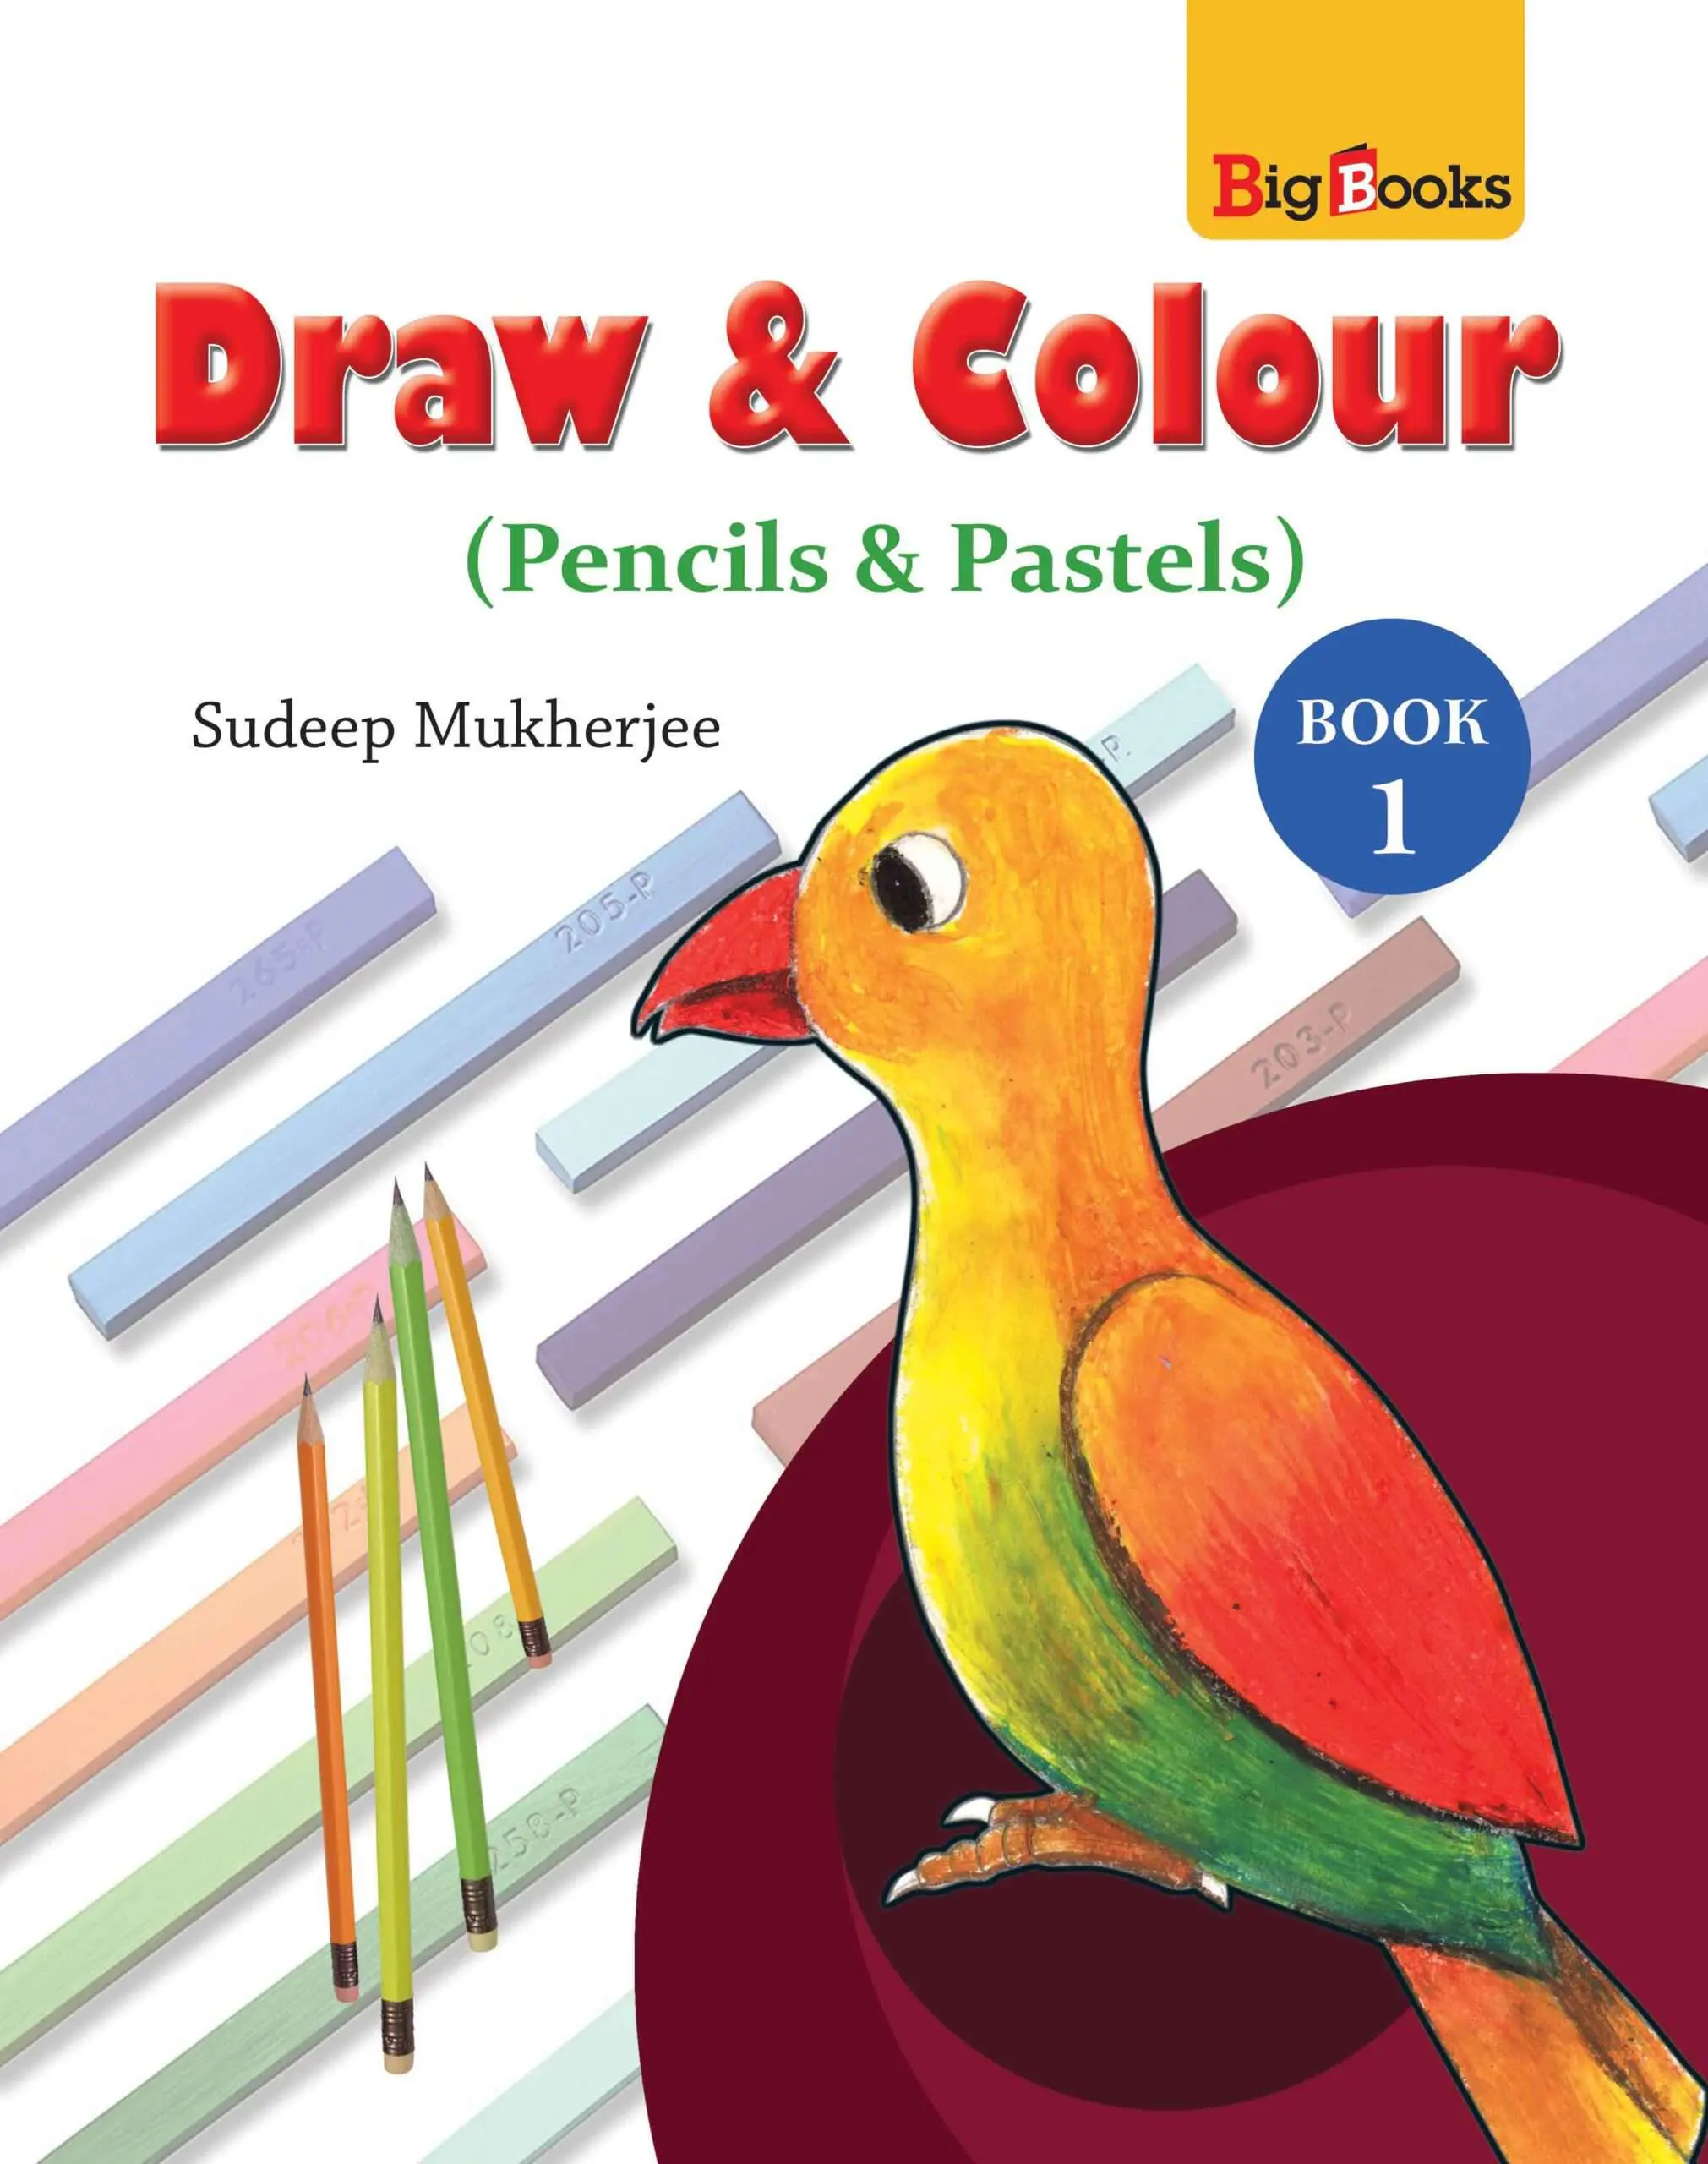 Fun with Pencil and Colour (Drawing) book for class 2 - Sahitya Bhawan